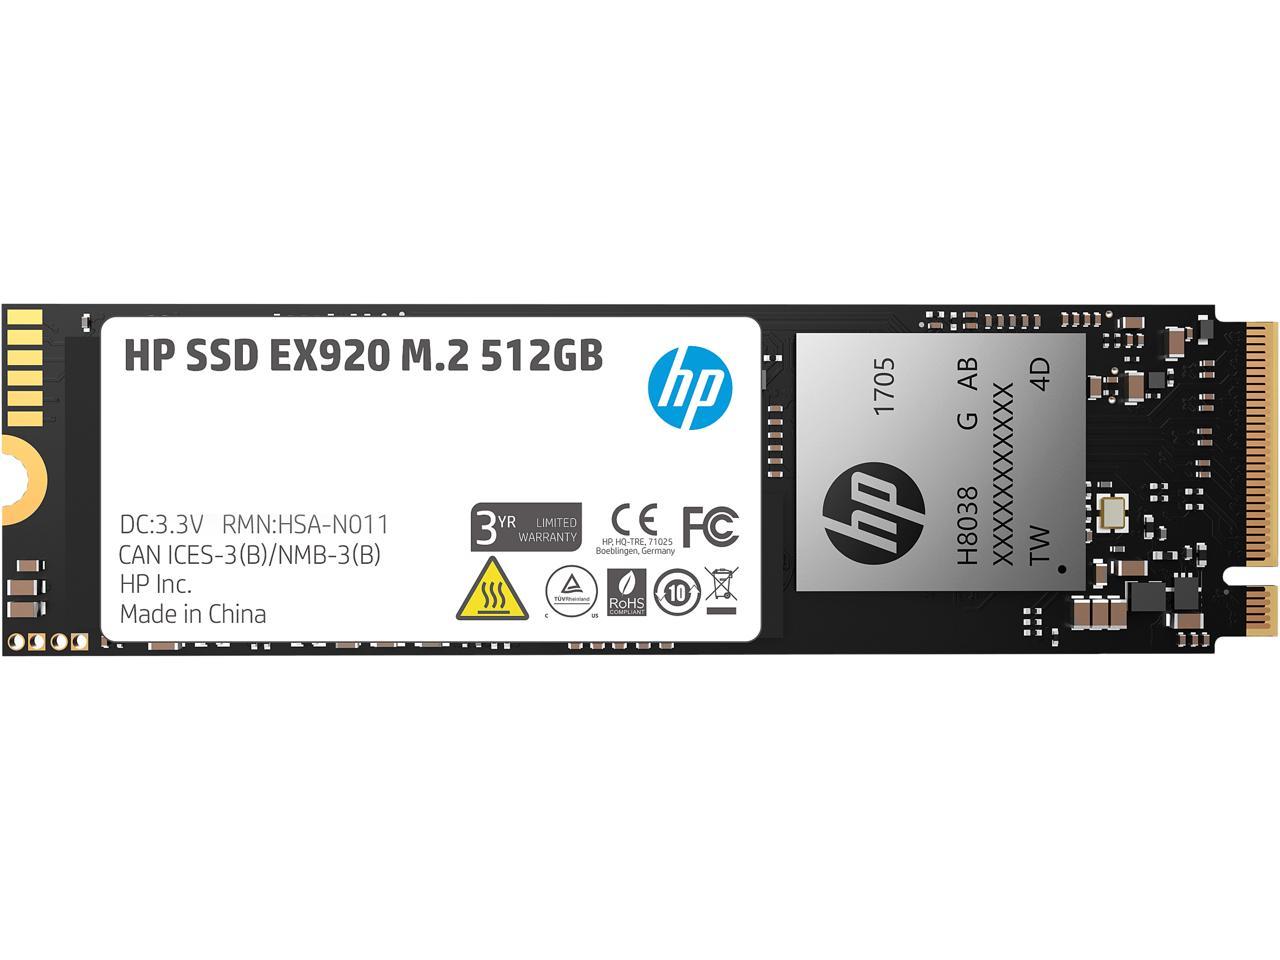 Occurrence Orchard conjunction HP EX920 M.2 512GB PCIe 3.0 x4 NVMe 3D TLC NAND Internal Solid State Drive ( SSD) 2YY46AA#ABC - Newegg.com